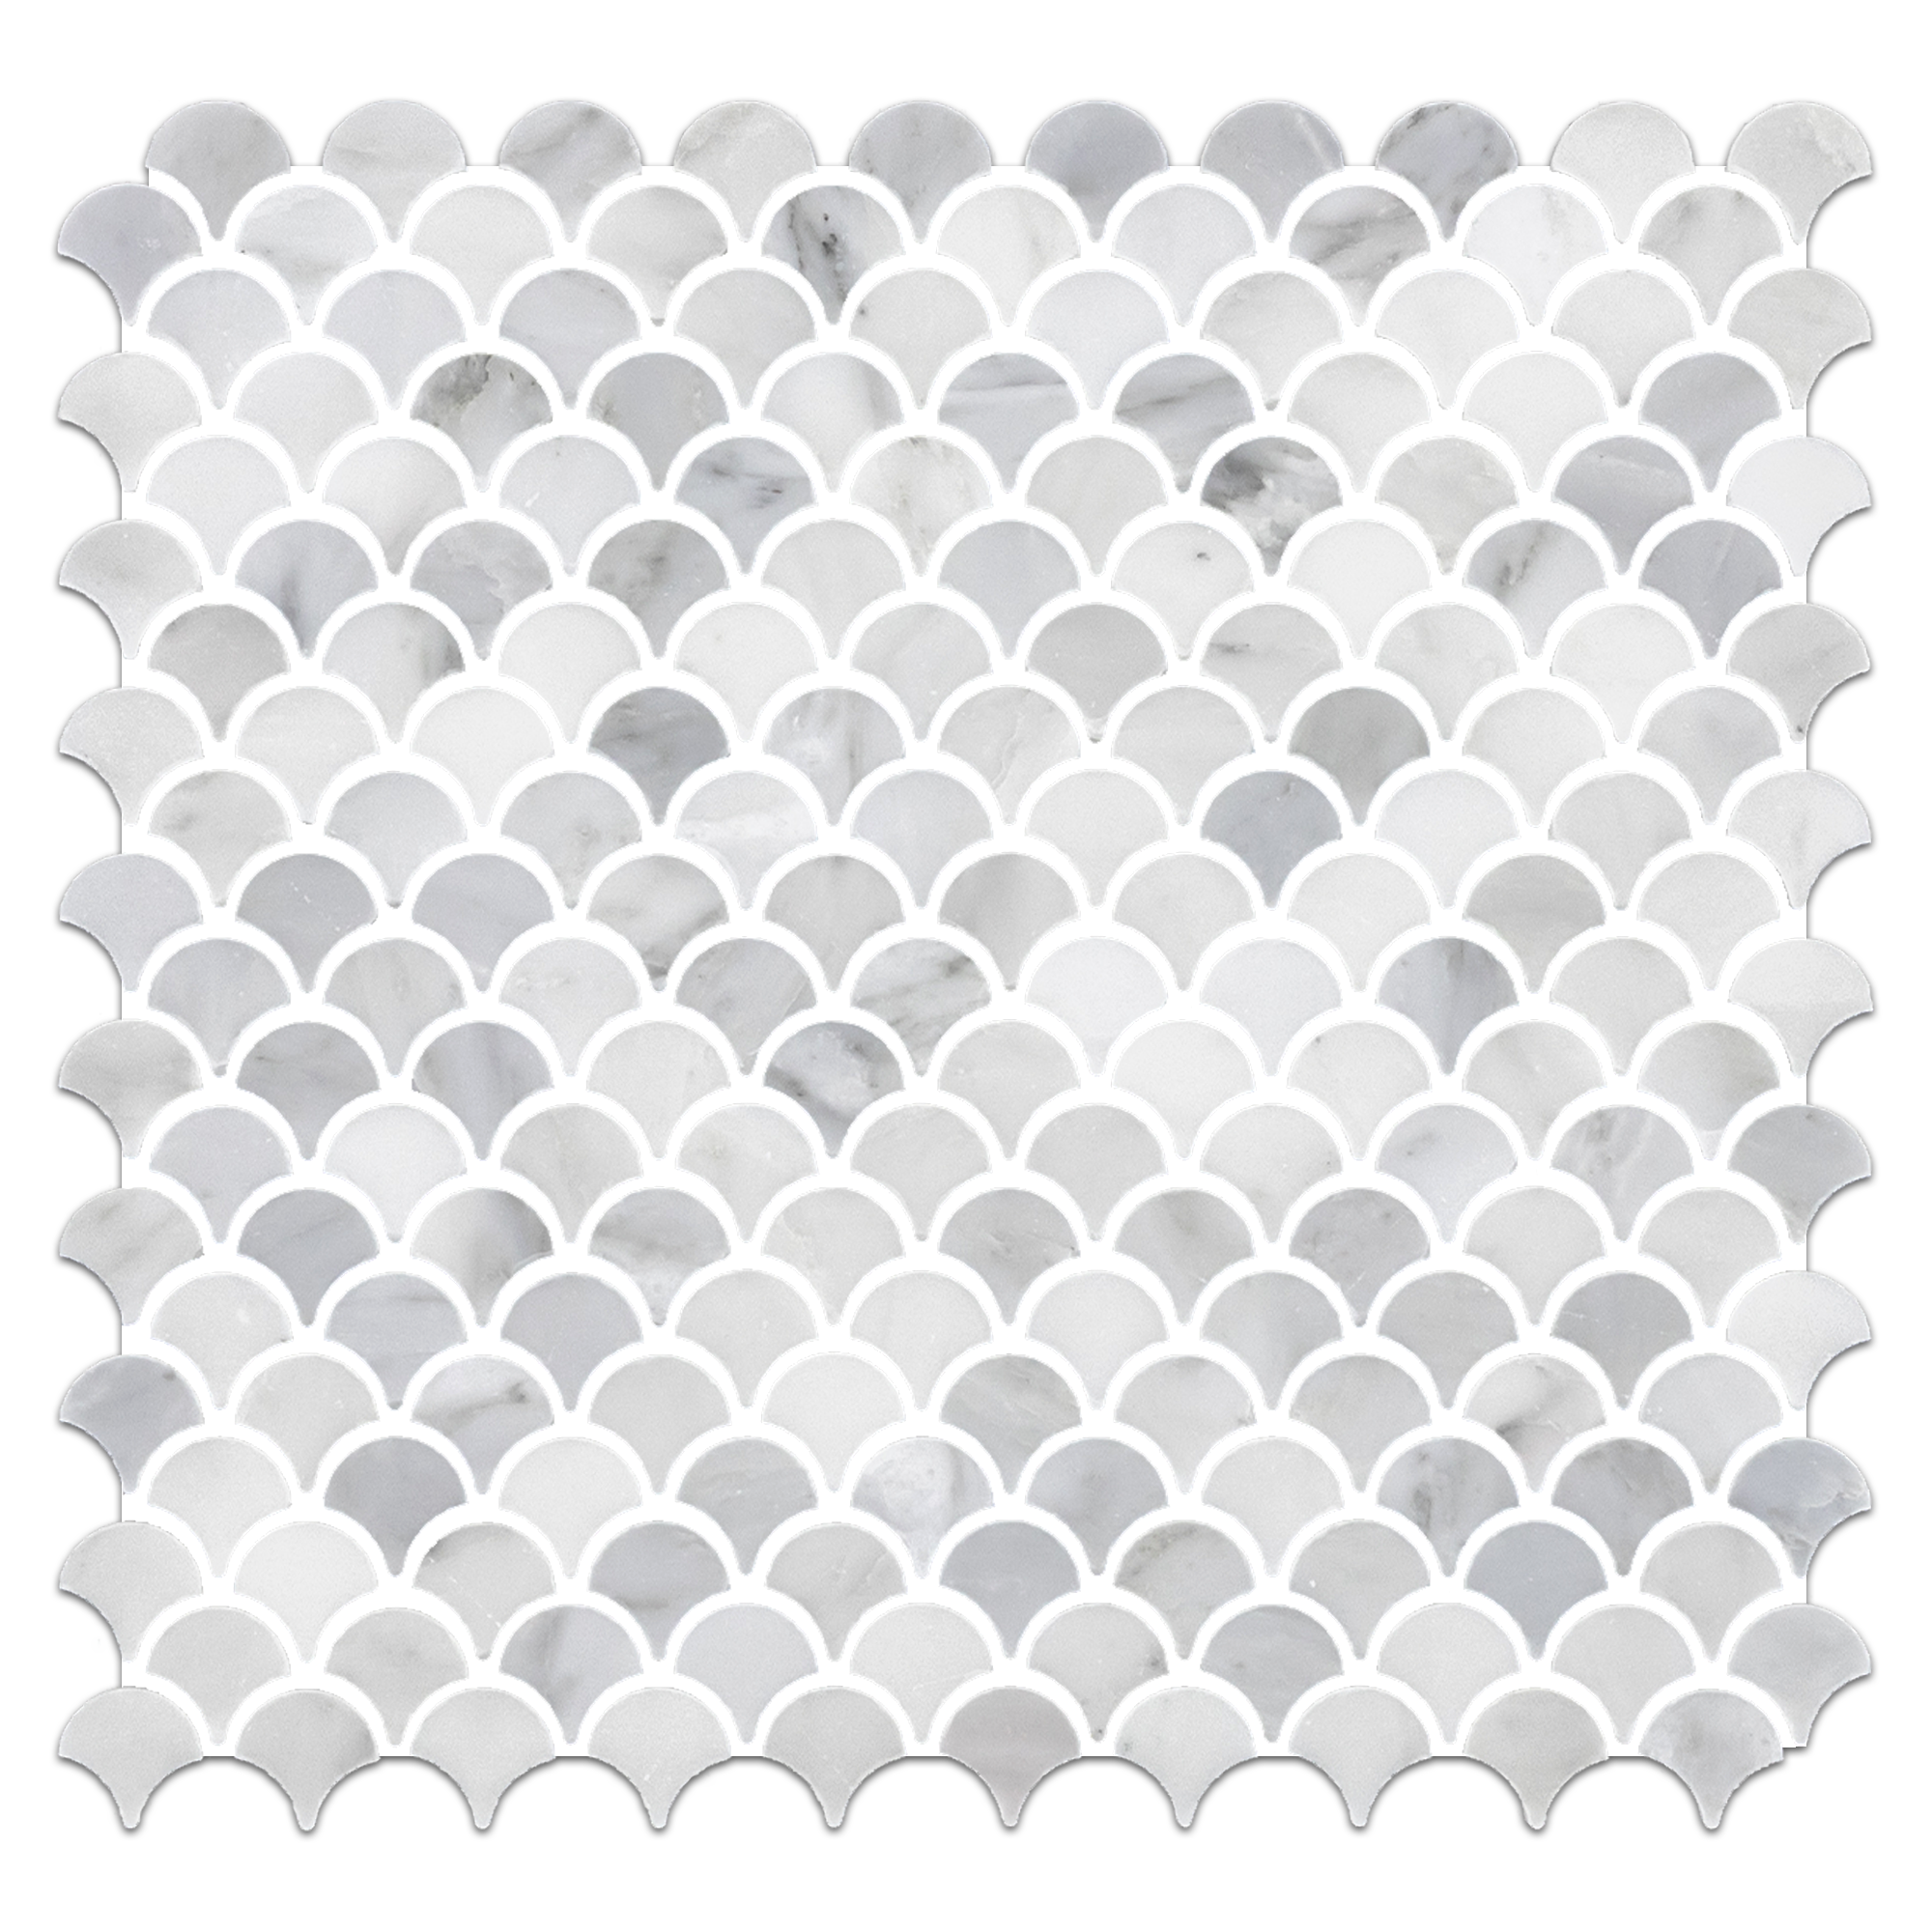 Elon Pearl White Marble Scales Field Mosaic 11.1875x11.625x0.375 Polished Tile - Surface Group Online